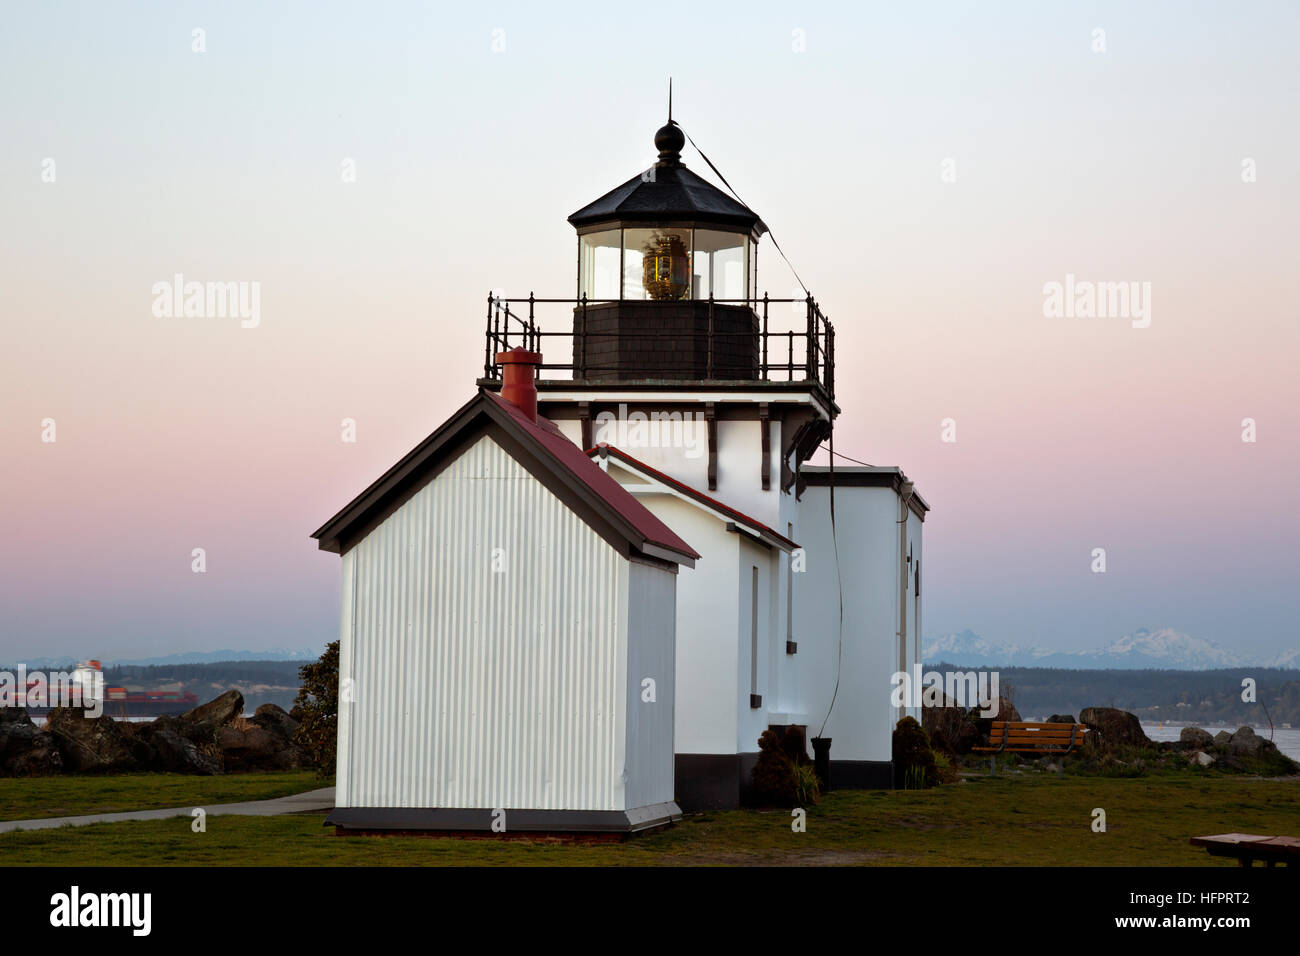 WASHINGTON - Dusk at Point No Point Lighthouse located on the Puget Sound near Hansville with the Cascade Mountains to the east. Stock Photo